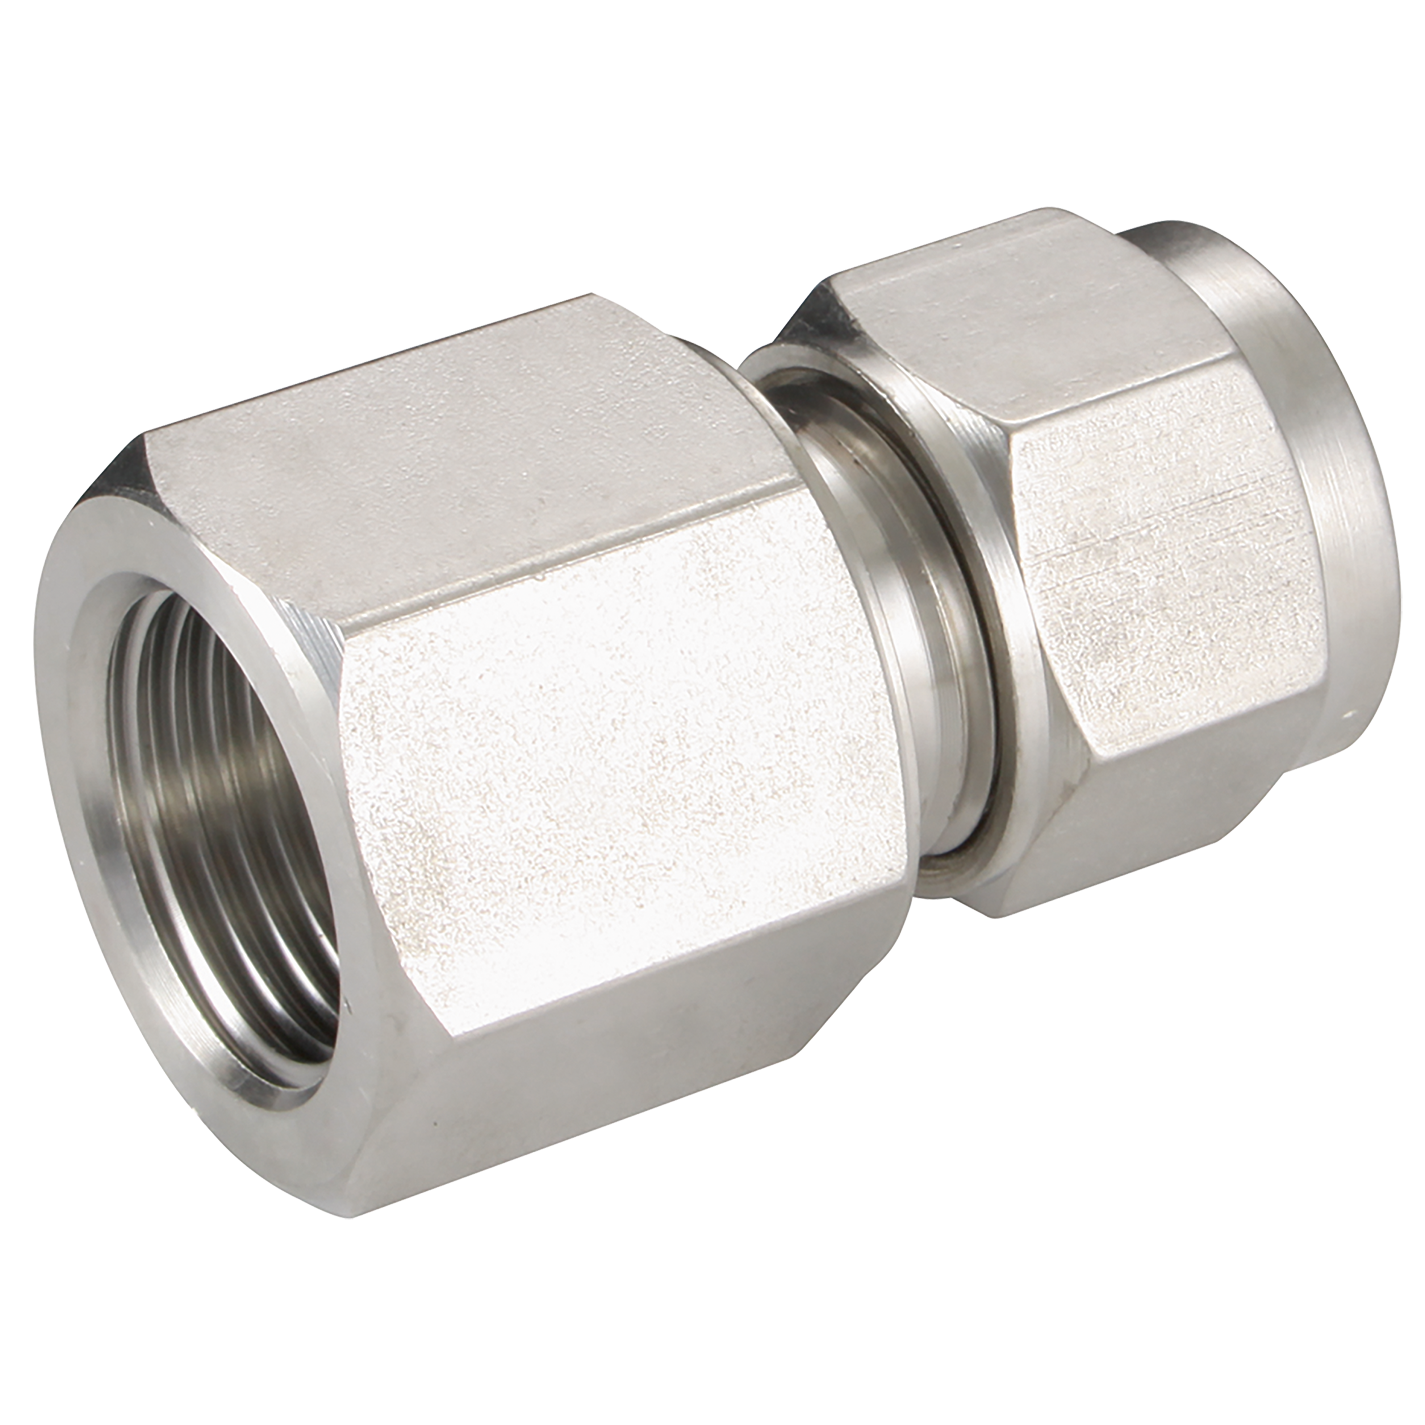 FEMALE ISO CONNECTOR 8 OD 3/8 BSPT